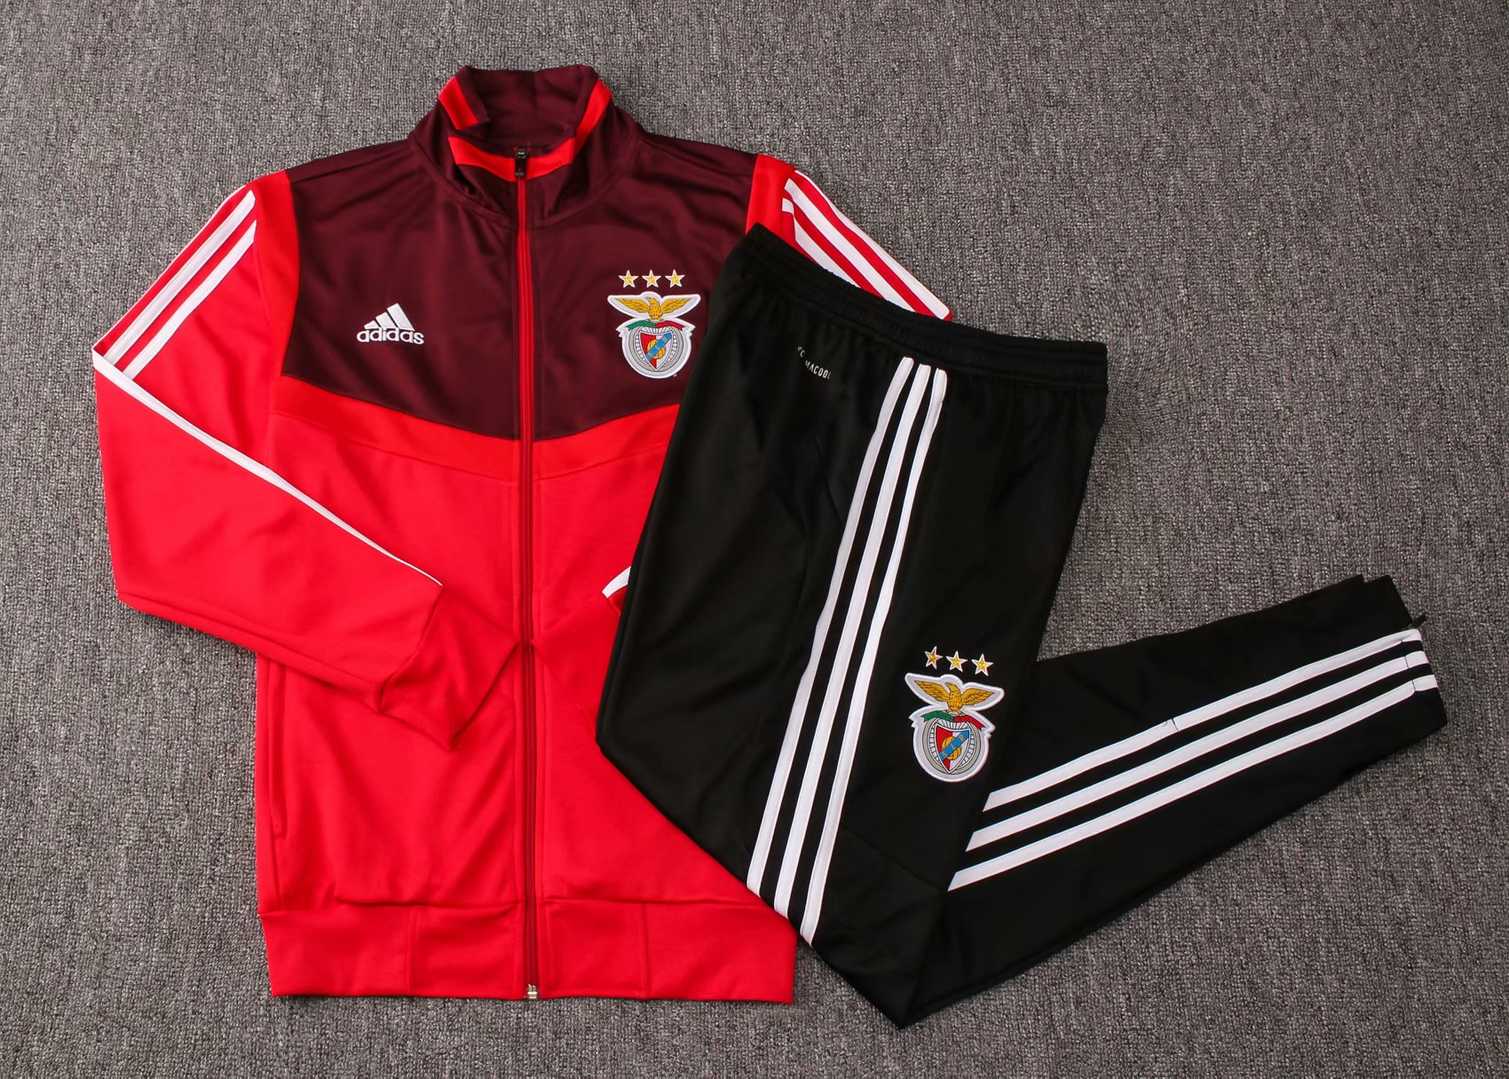 2019/20 Benfica High Neck Red Mens Soccer Training Suit(Jacket + Pants)